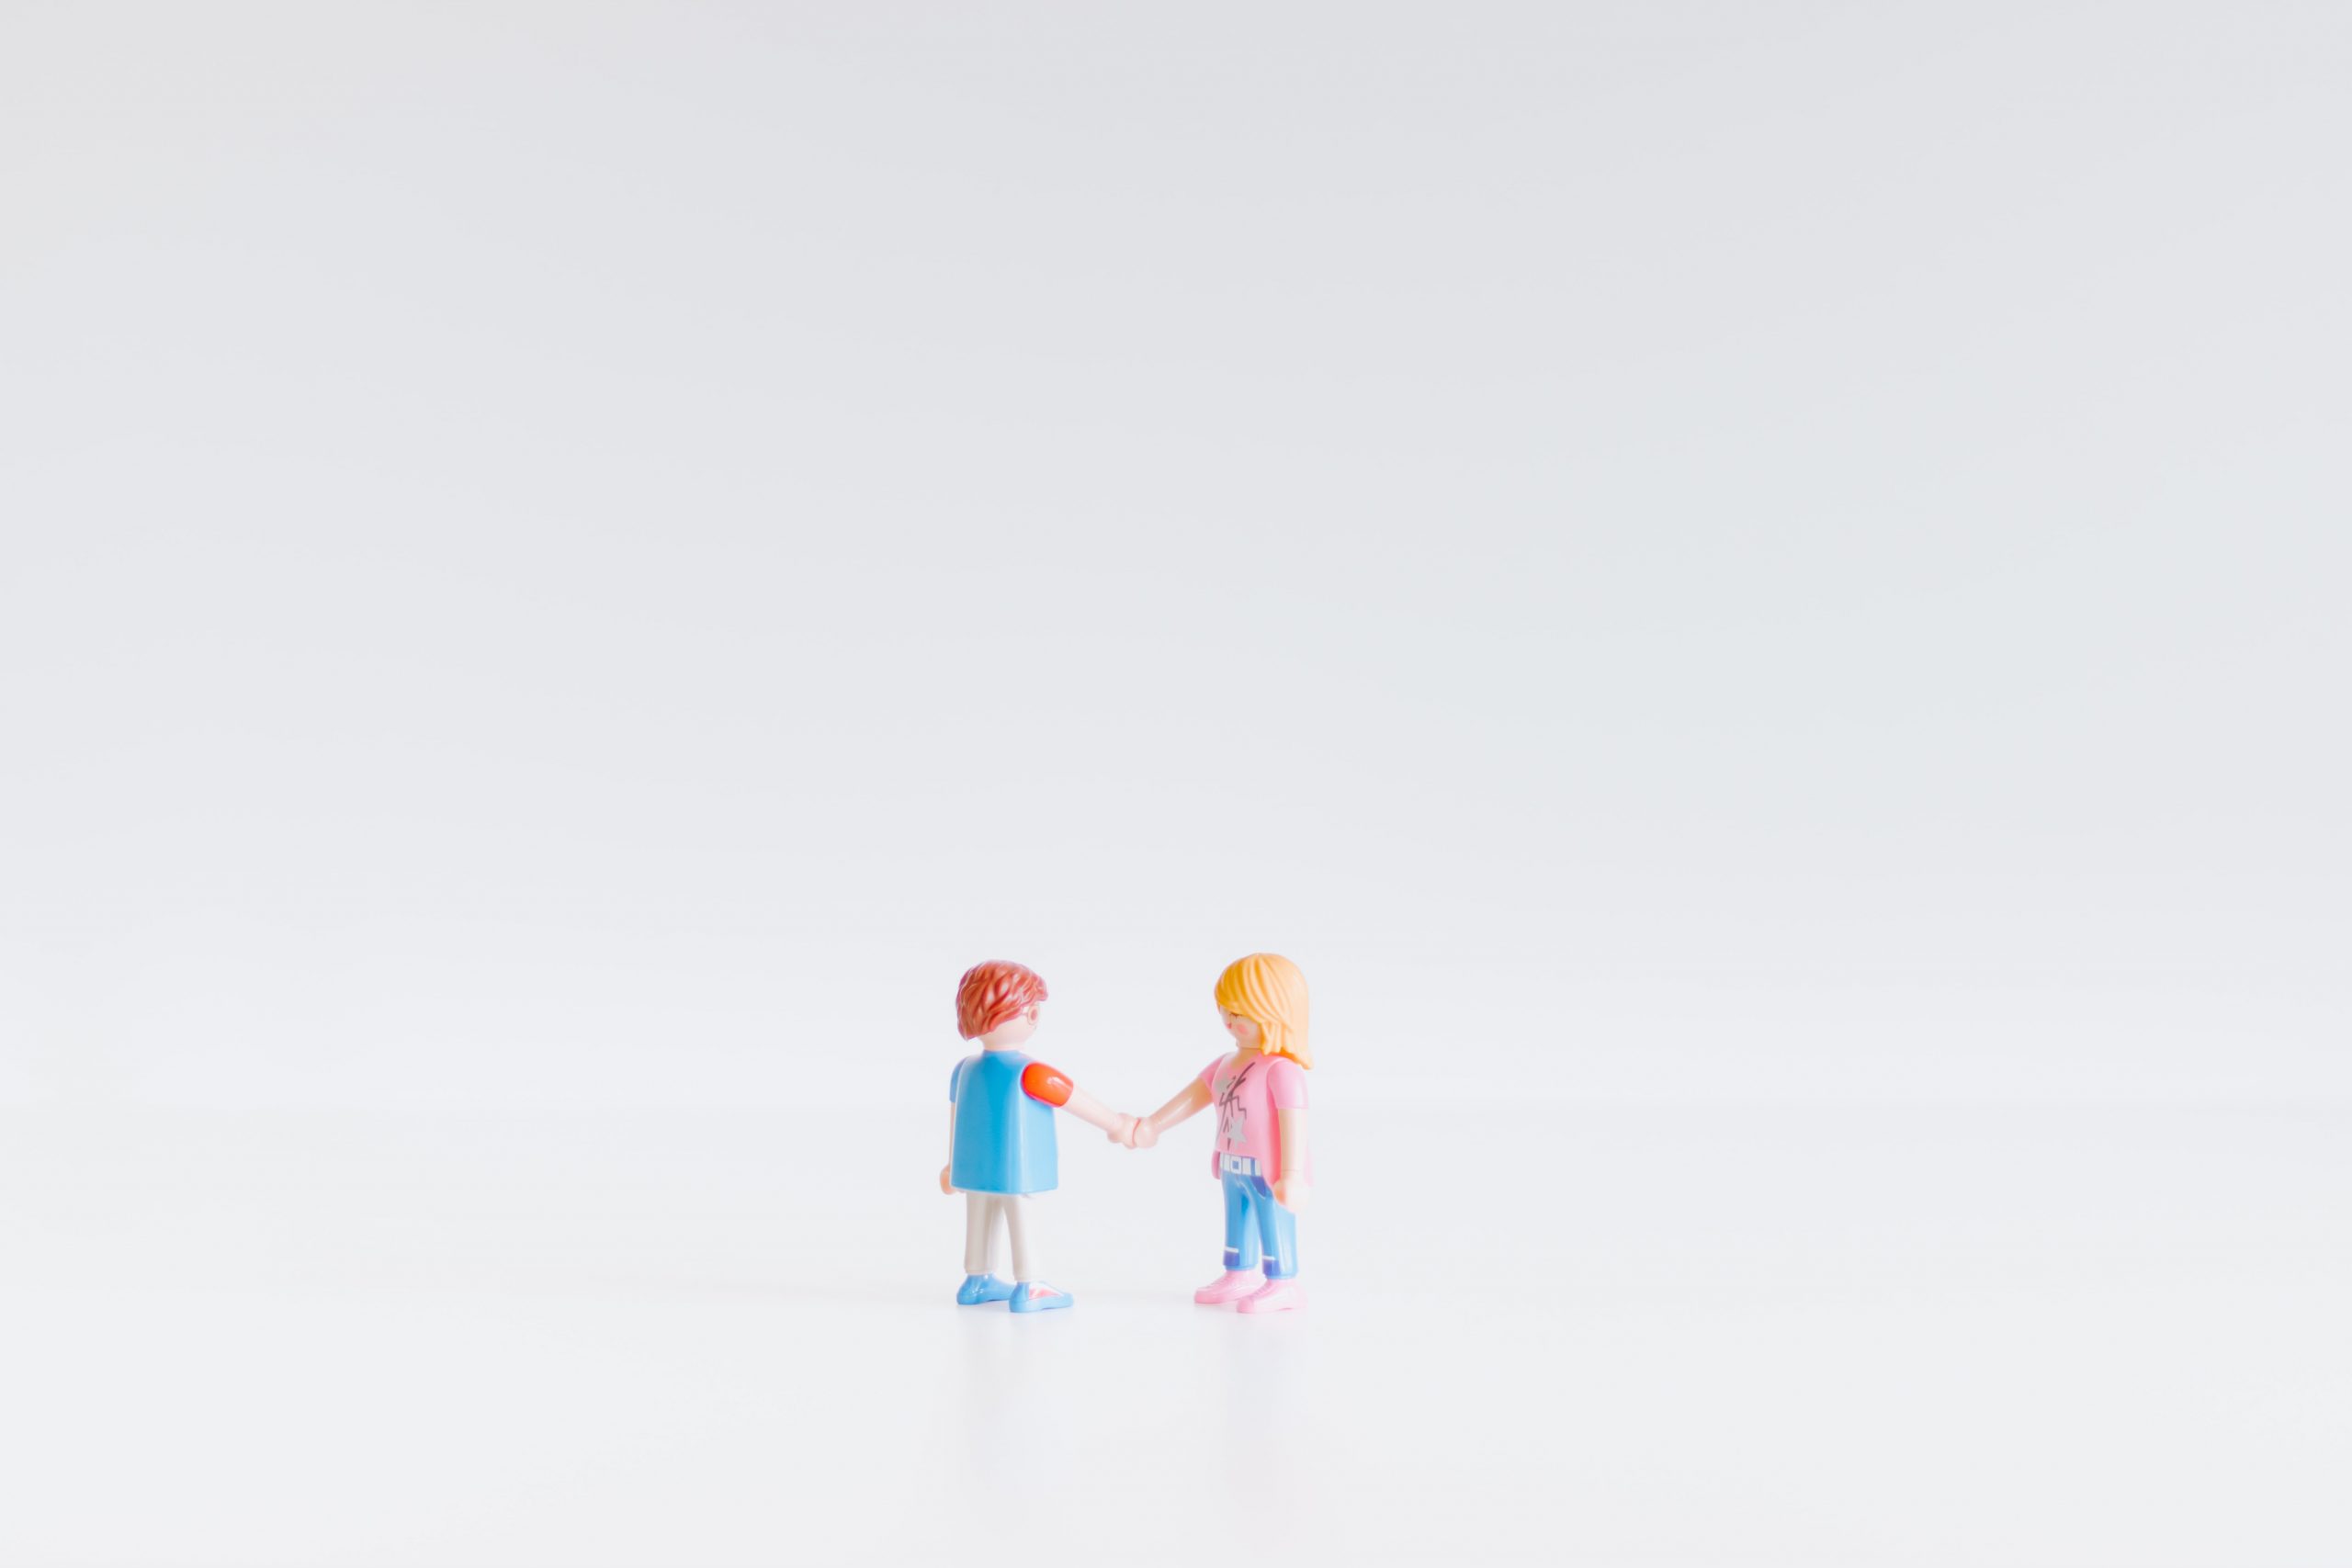 A boy doll and a girl doll holding hands.